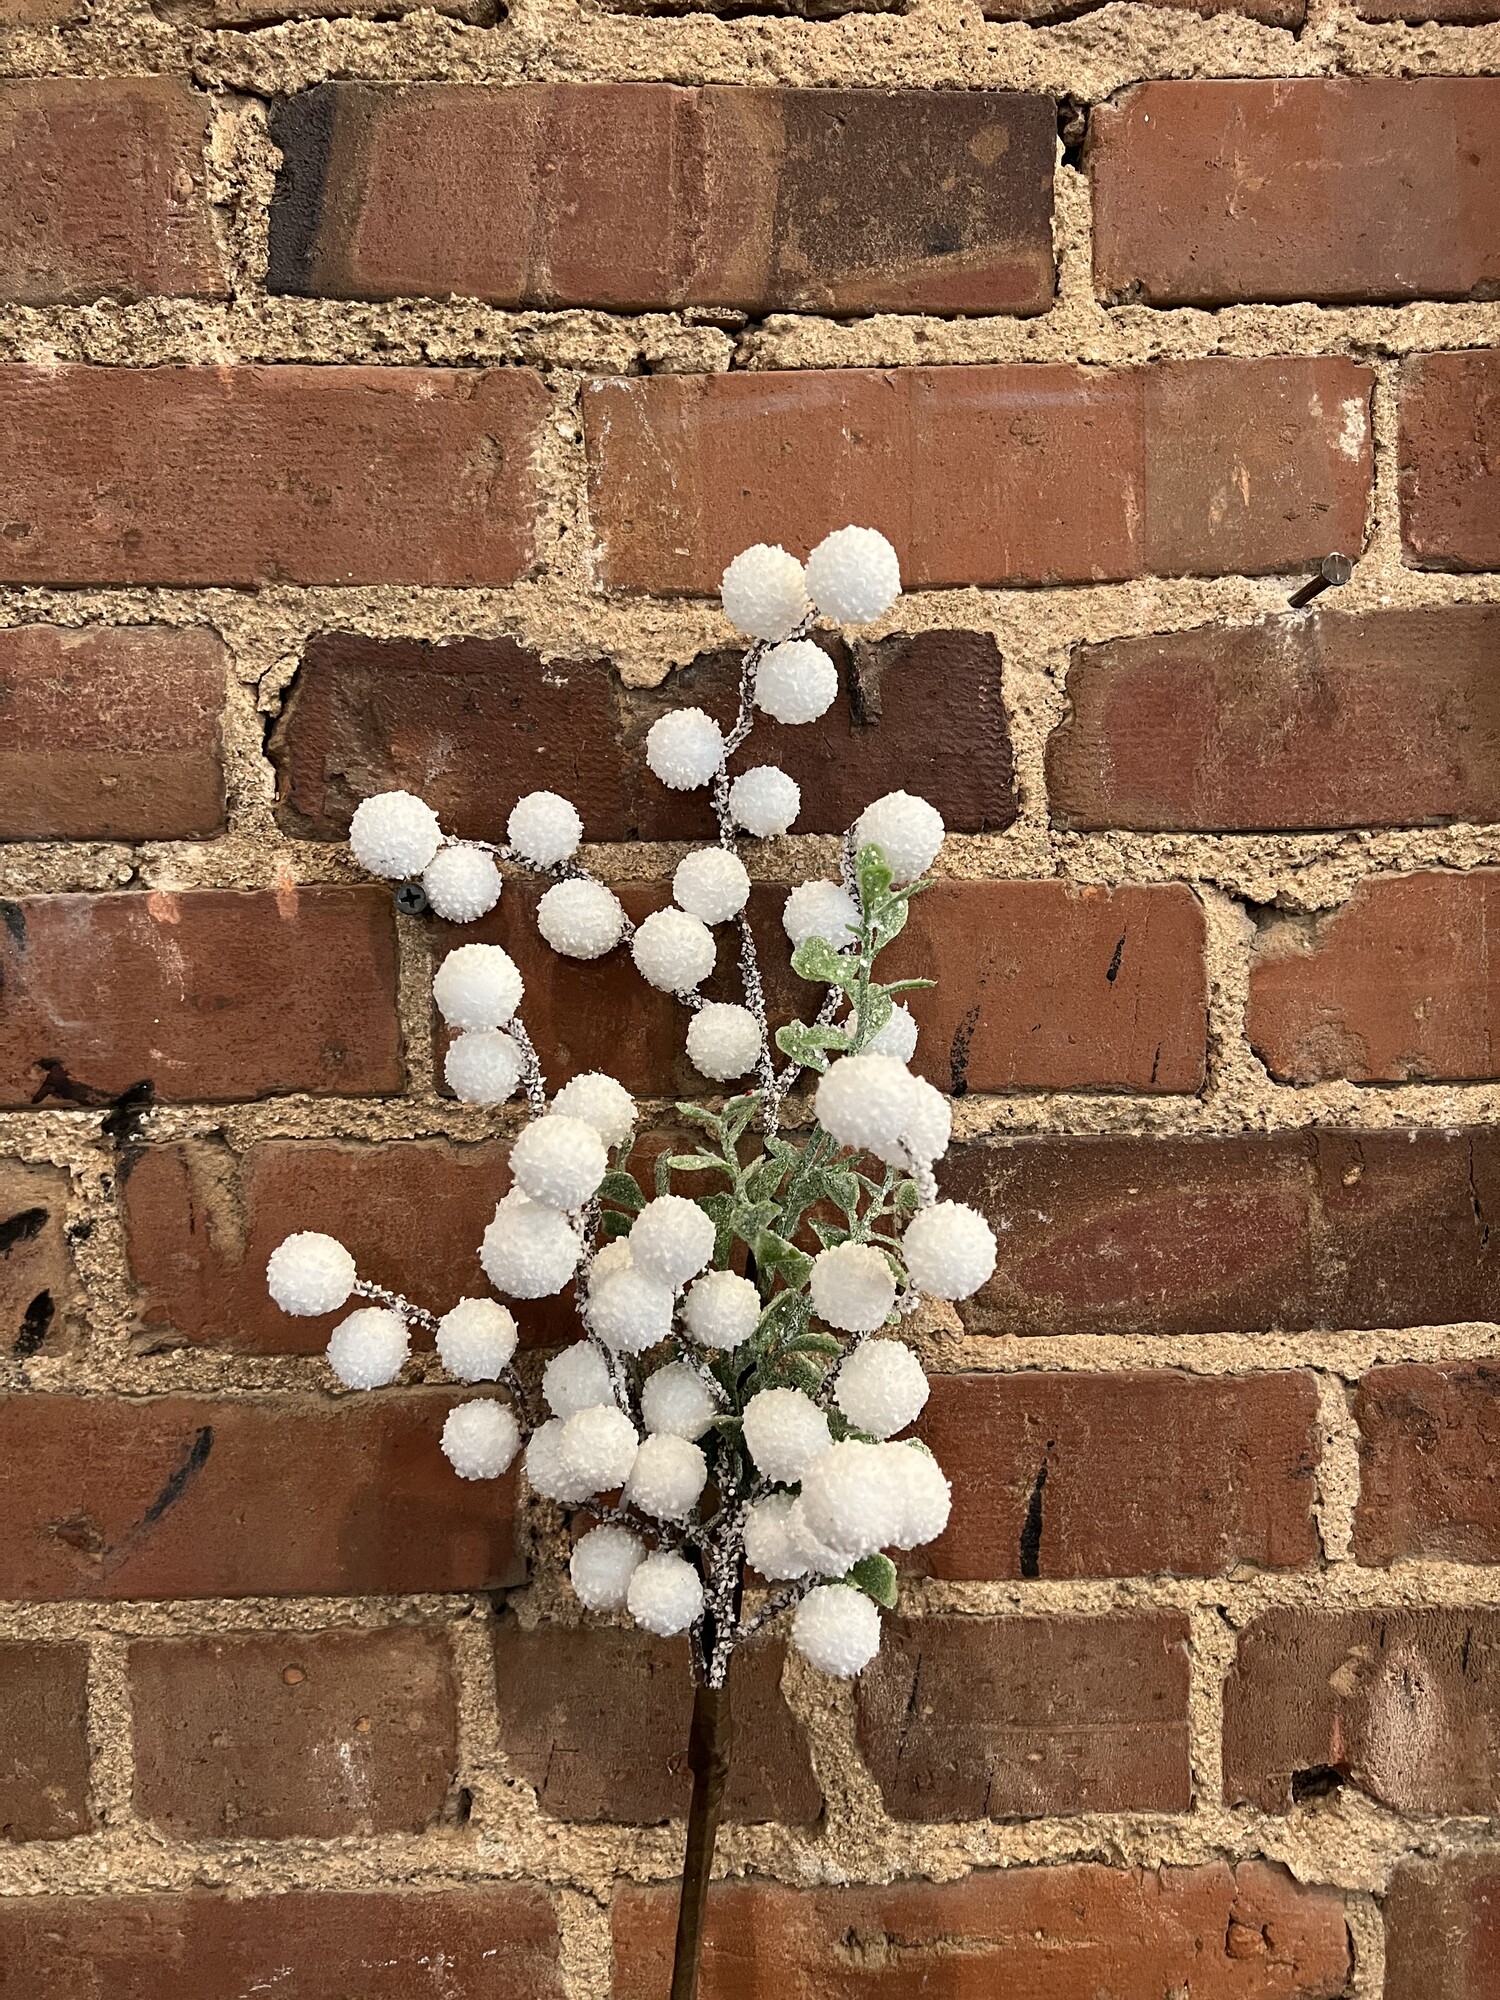 Small Snowballs with a touch of greenery all with a bit of glitter make this a pretty stem to add to any winter decor. Stem measures 18 inches tall